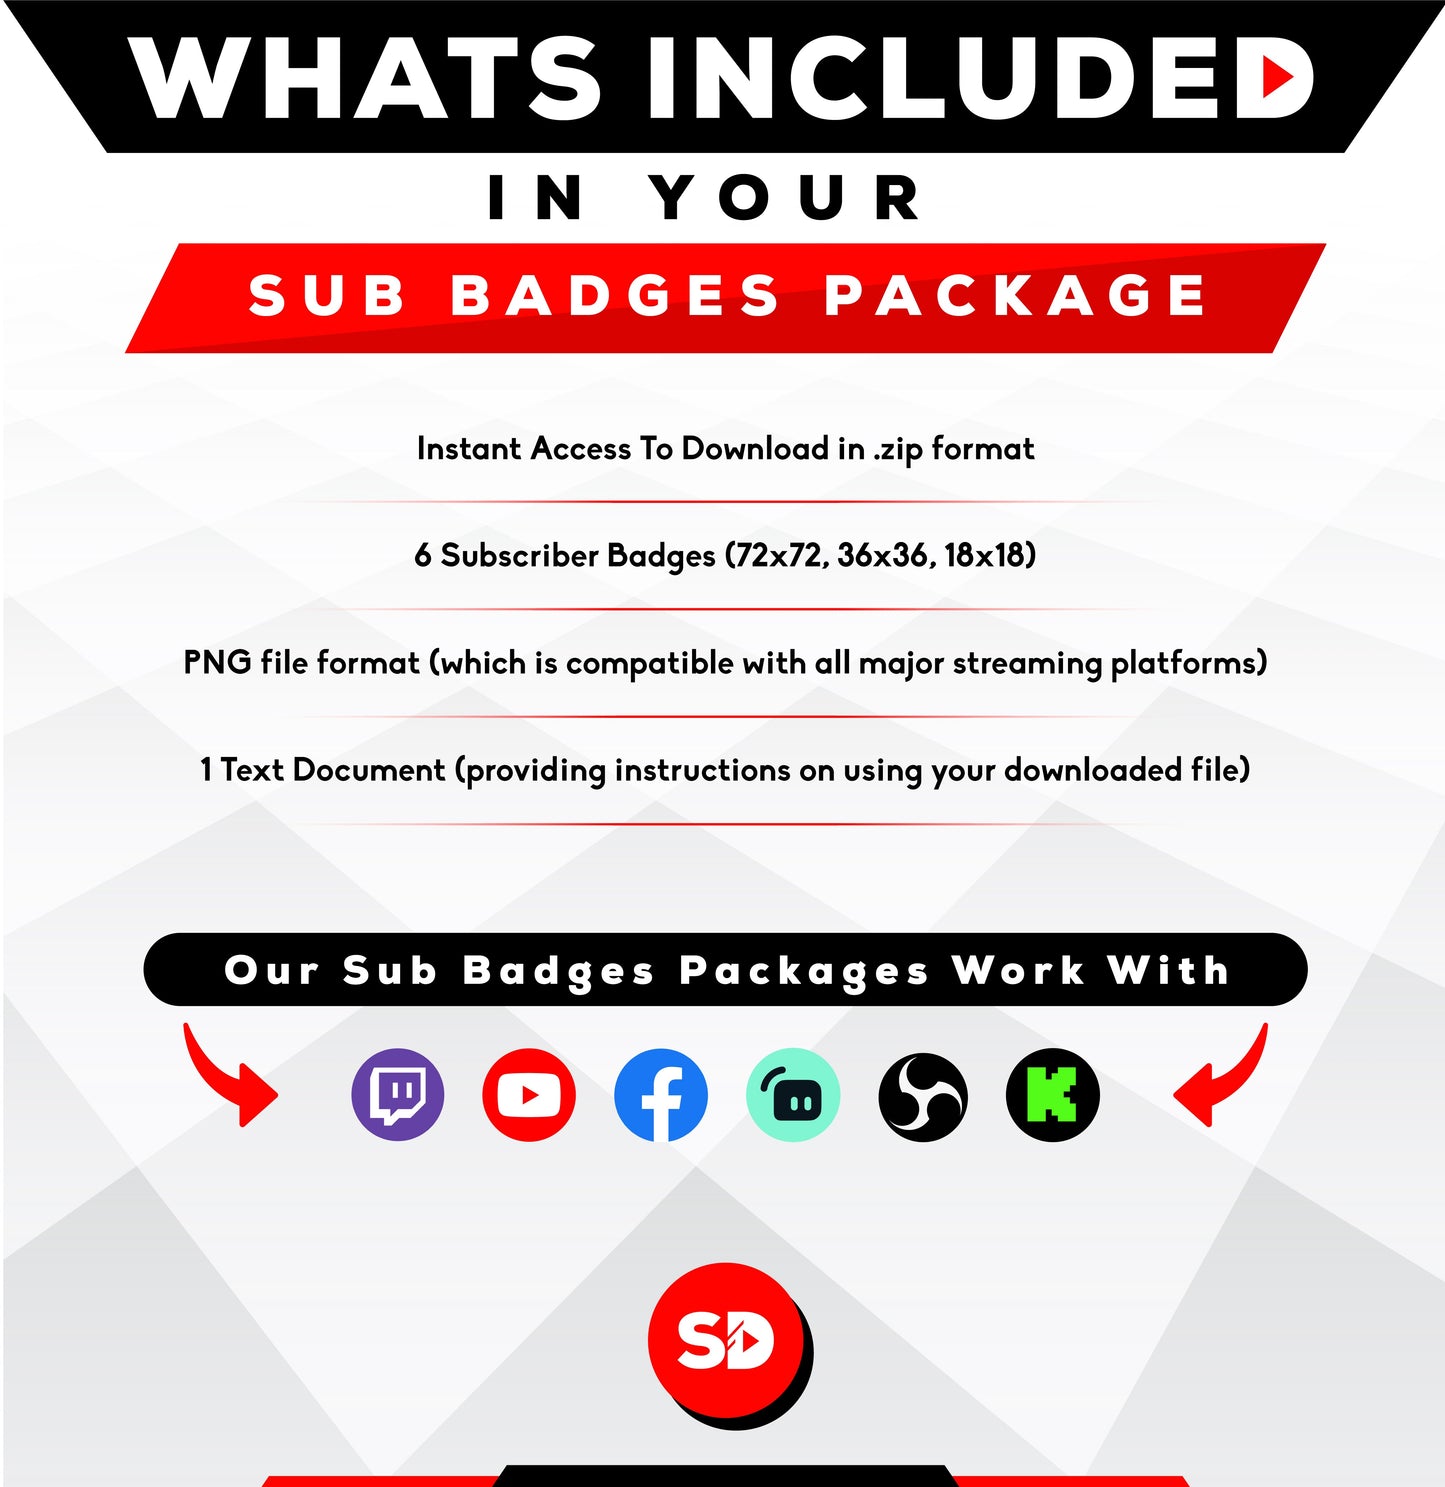 whats included in your package - sub badges - ramen - stream designz